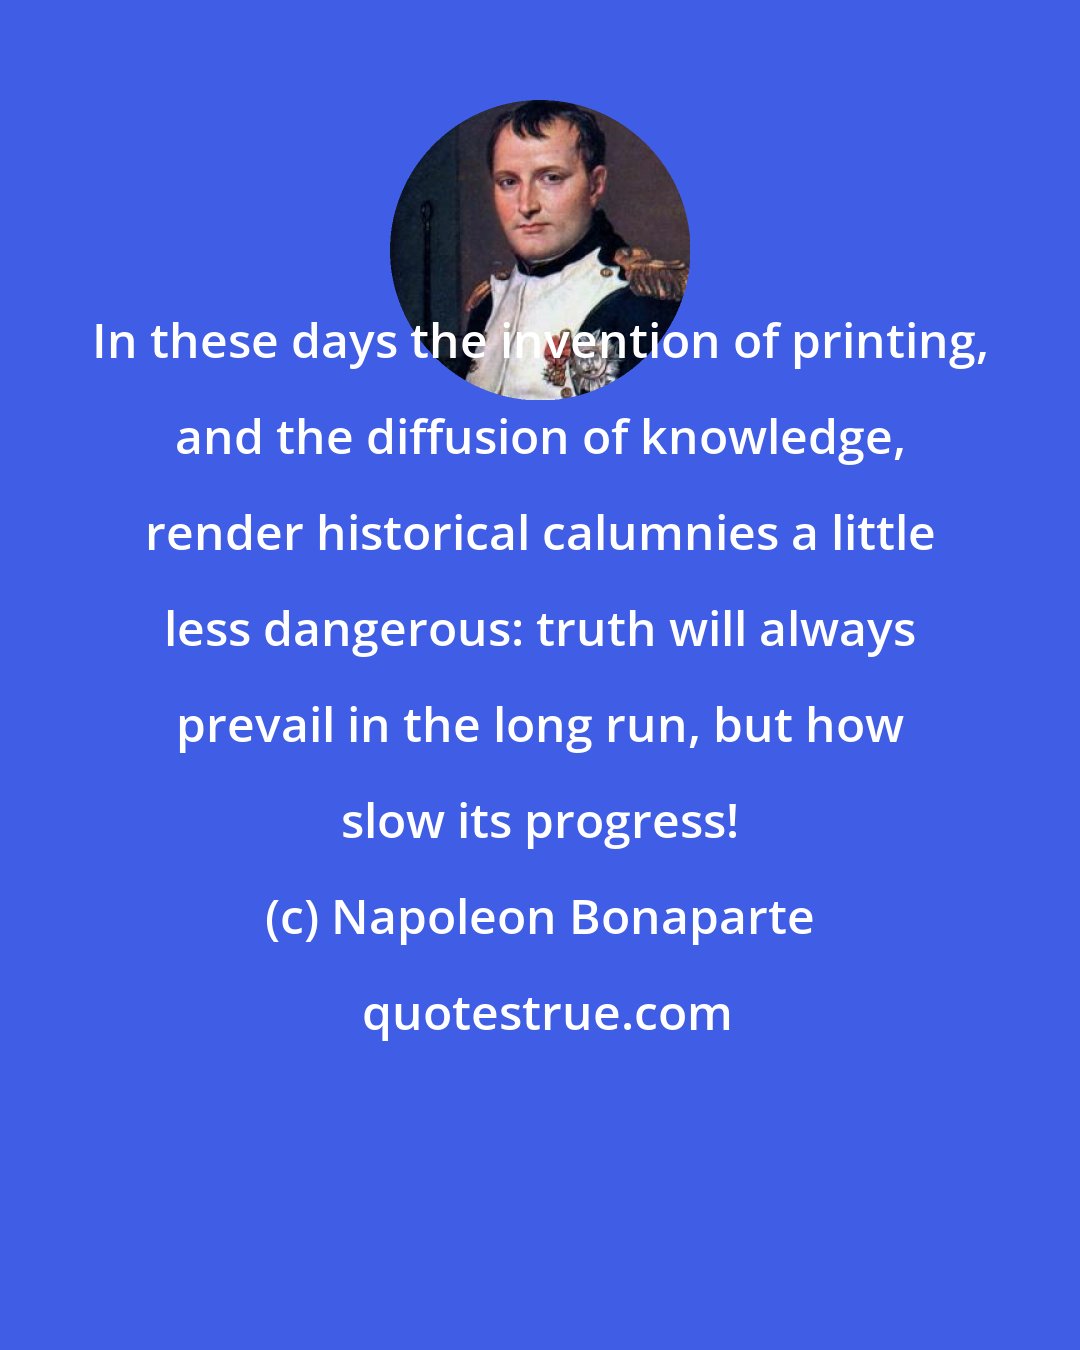 Napoleon Bonaparte: In these days the invention of printing, and the diffusion of knowledge, render historical calumnies a little less dangerous: truth will always prevail in the long run, but how slow its progress!